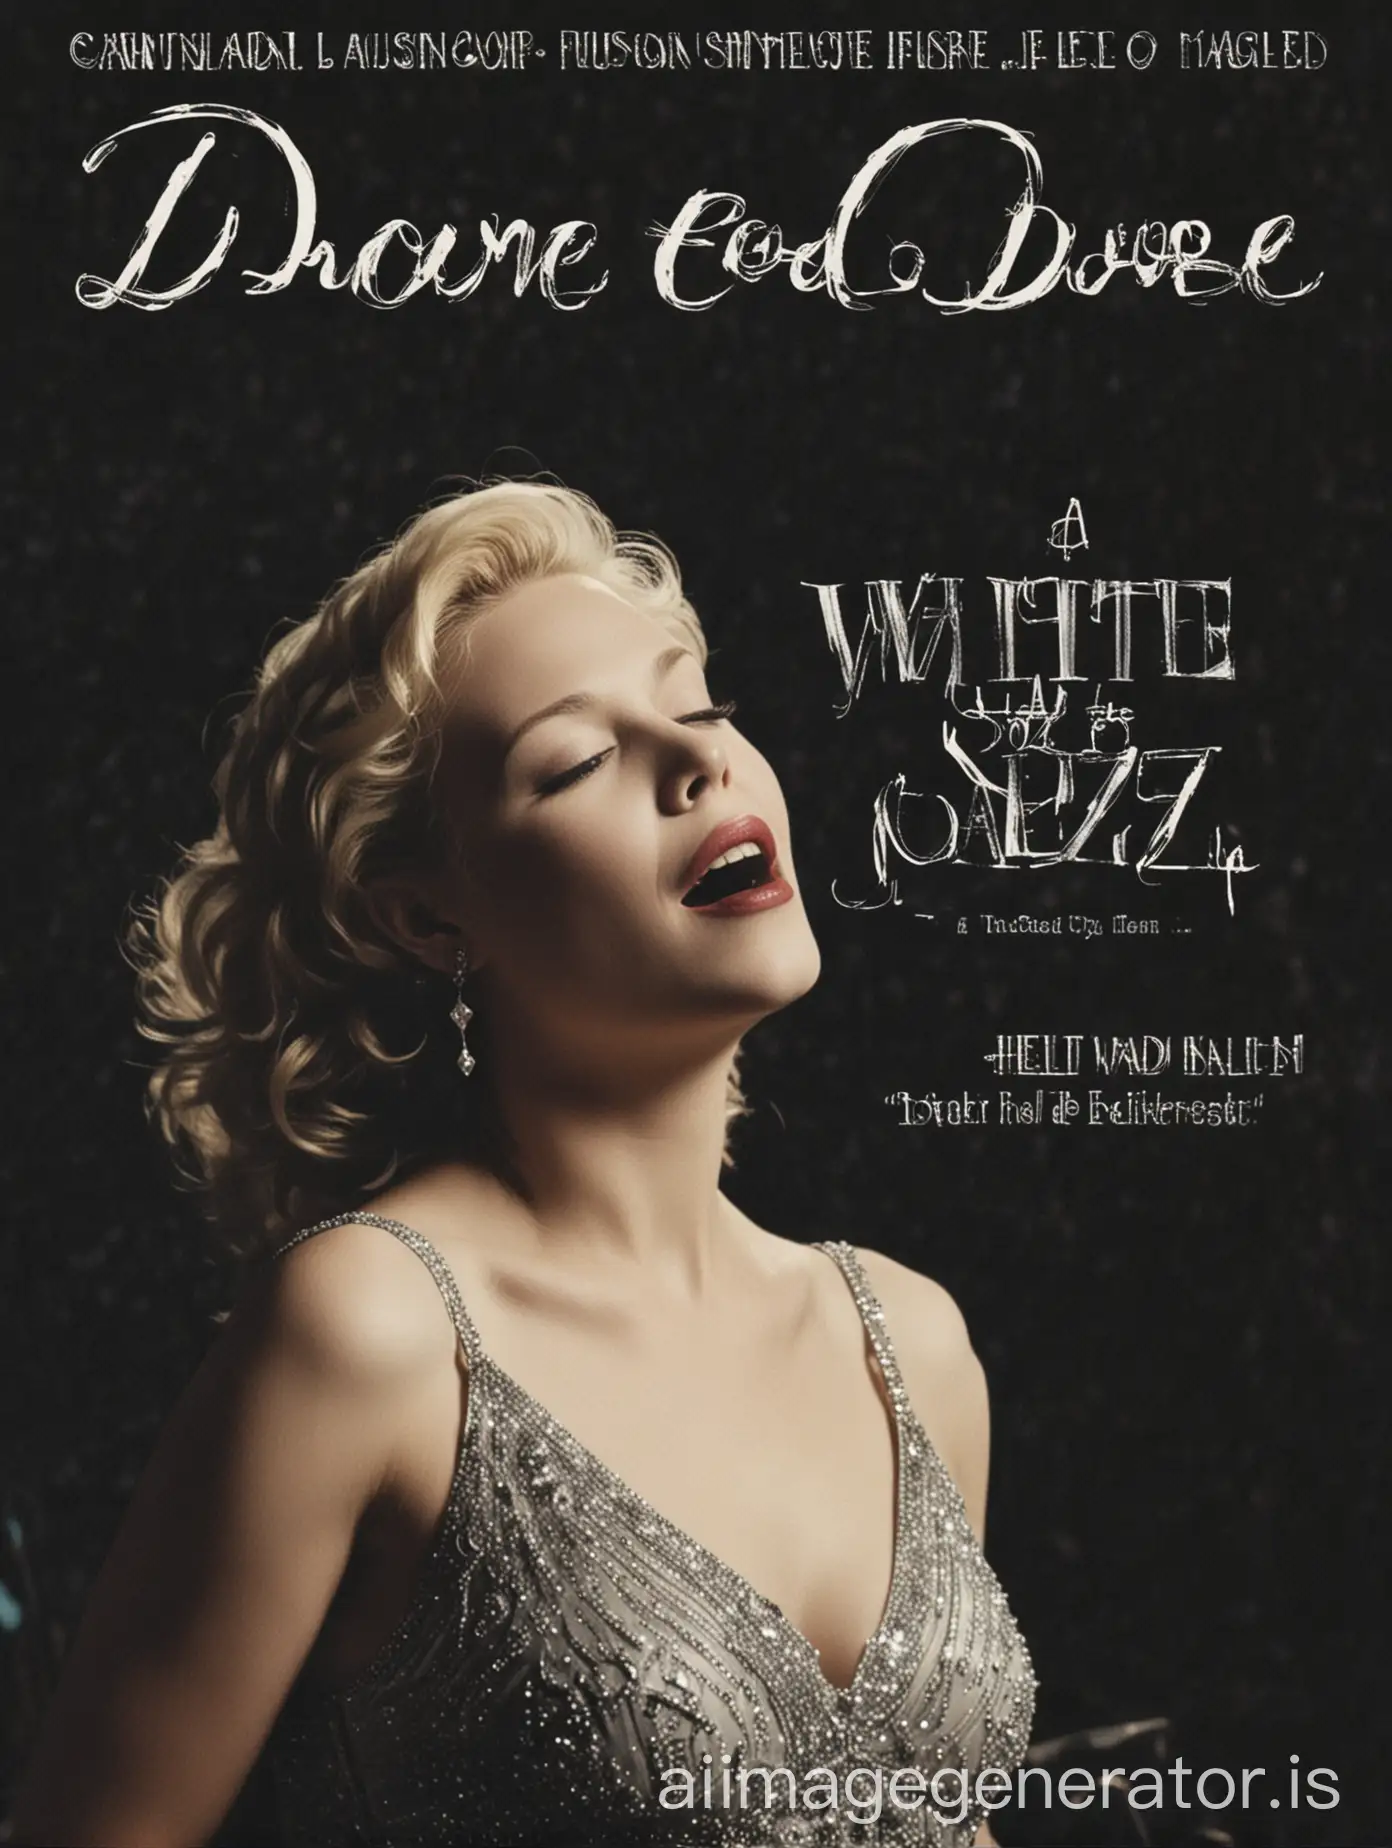 book cover about a dark story of a white jazz singer called dove